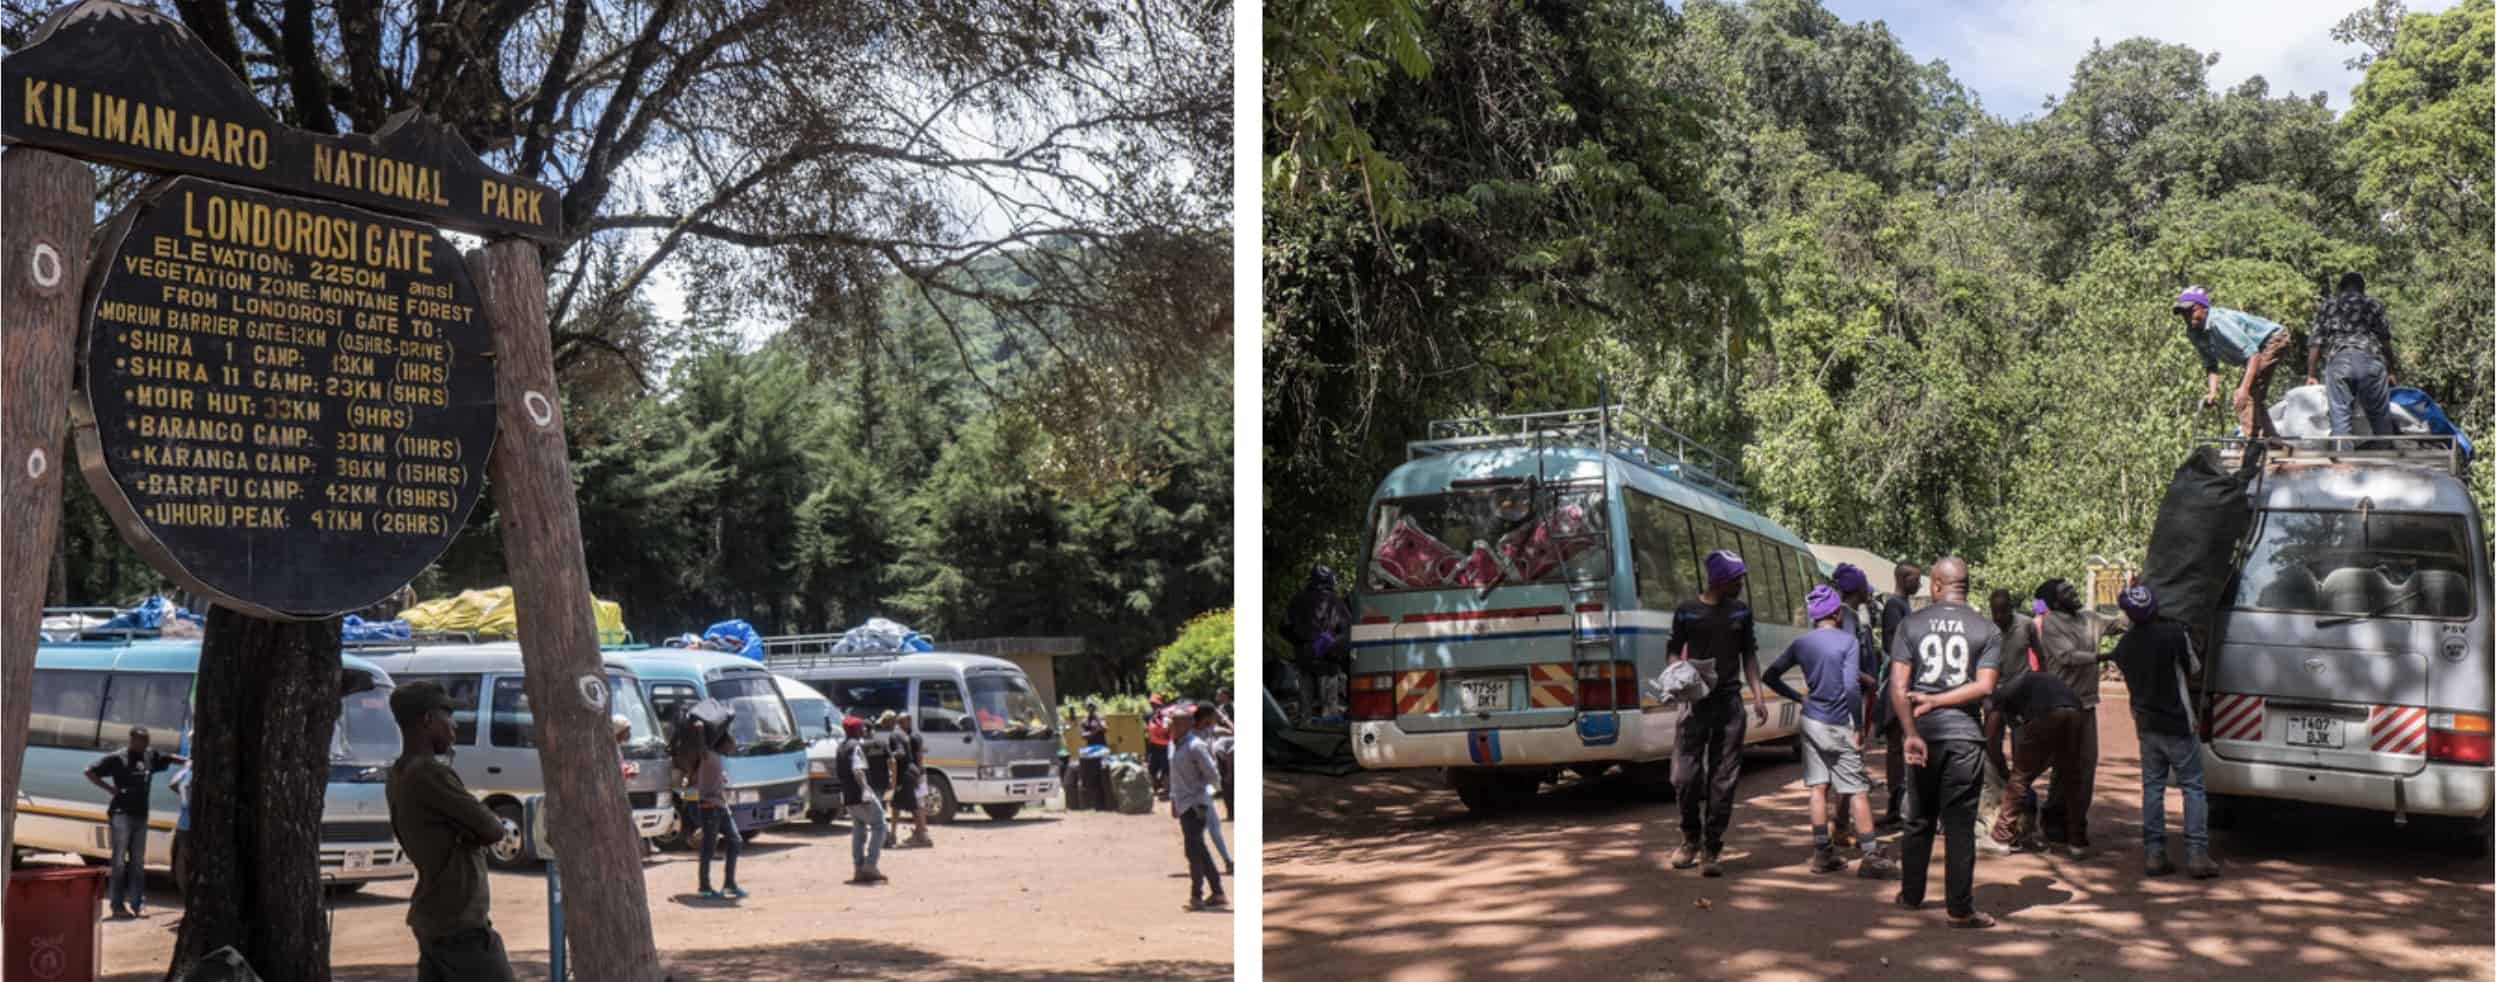 Vans with hikers parked and unloading at the Londorosi Gate at the start of the Kilimanjaro climb. 